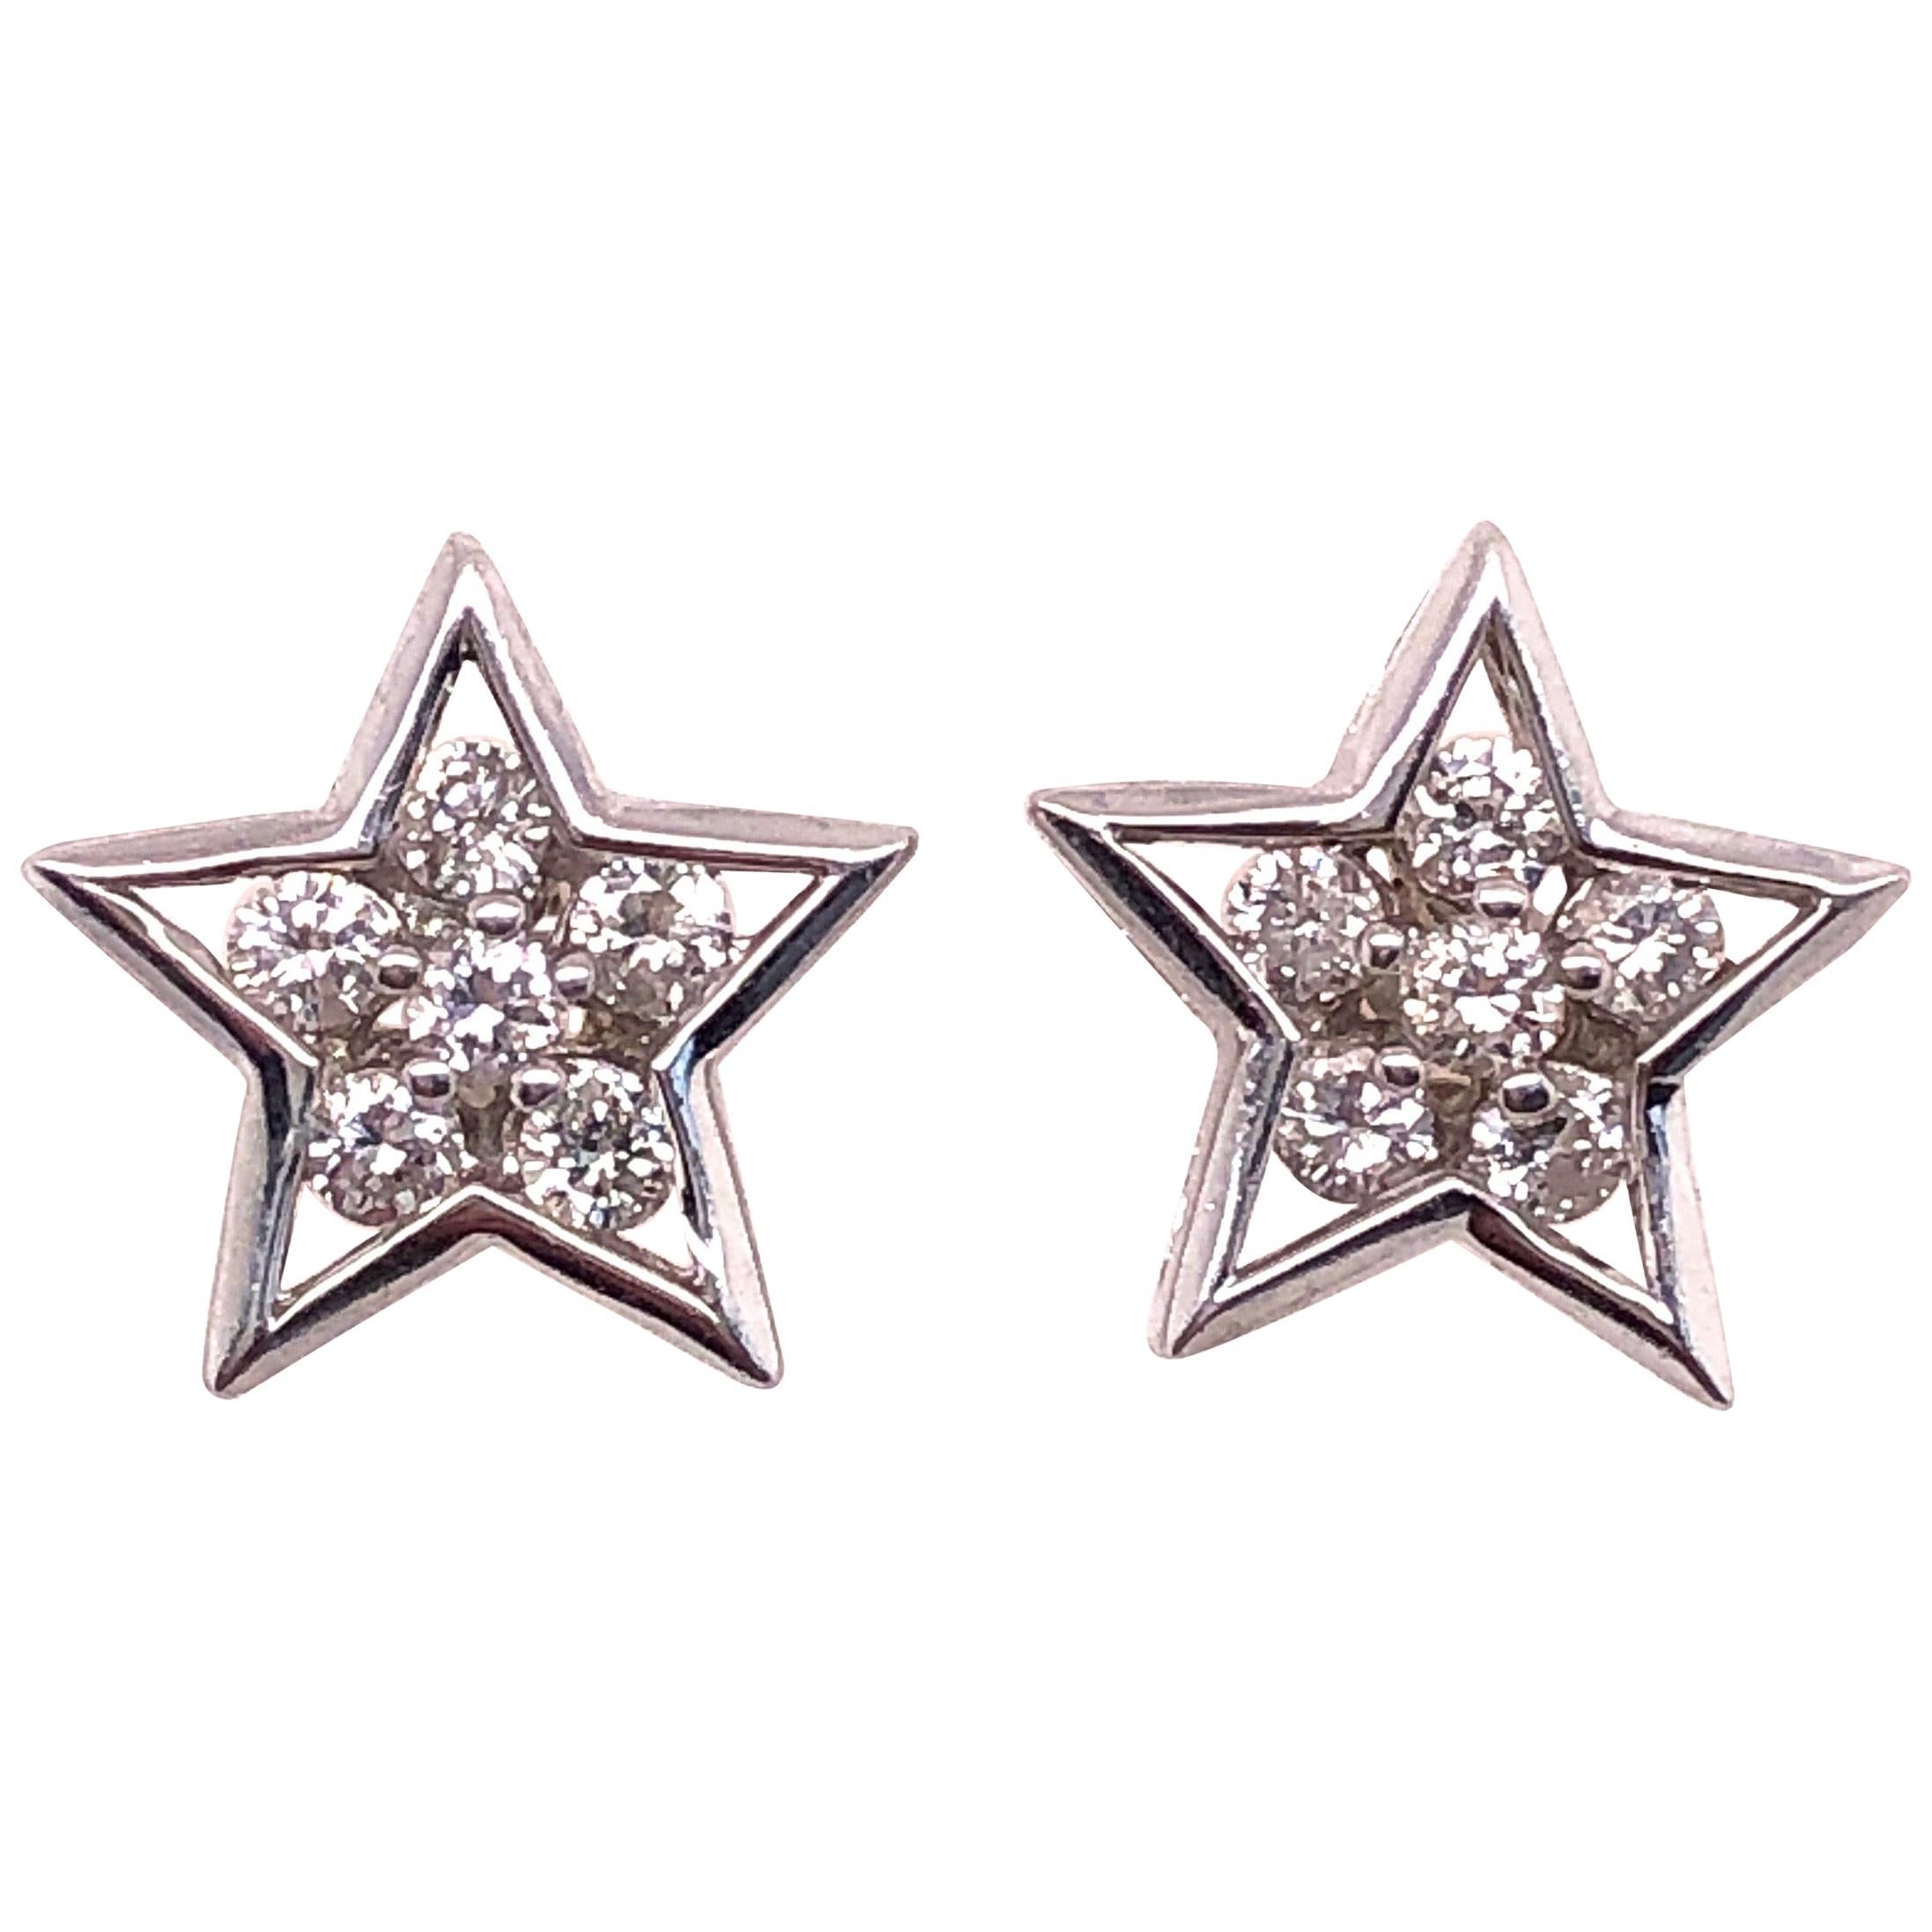 14 Karat White Gold with Diamonds Star Earrings 0.50 Total Diamond Weight For Sale